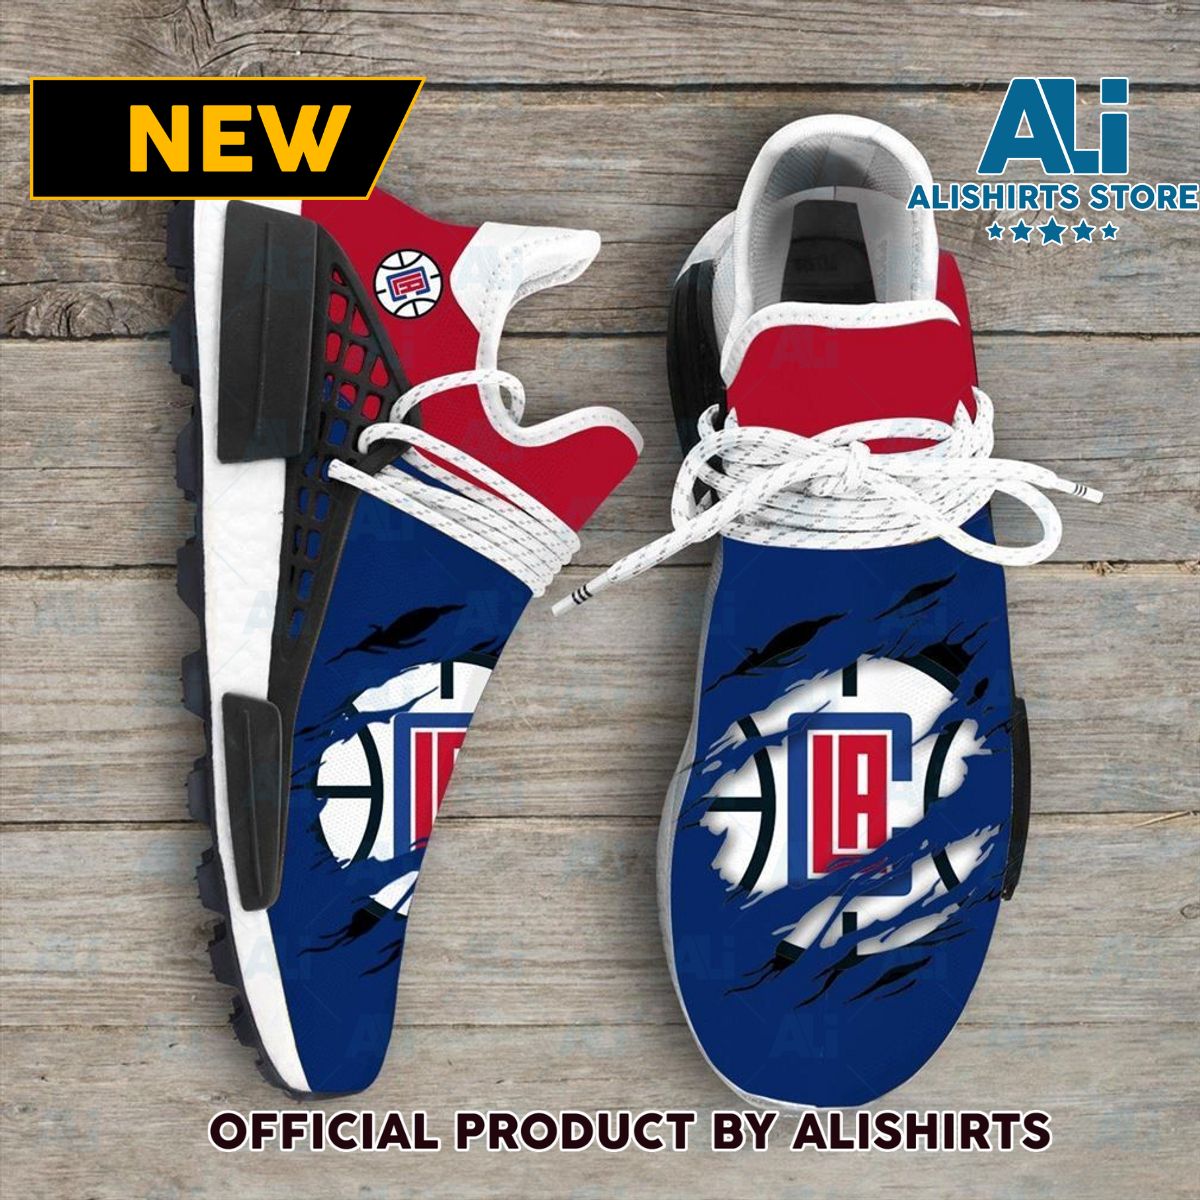 Los Angeles Clippers NBA Sport Teams NMD Human Race Adidas NMD Sneakers